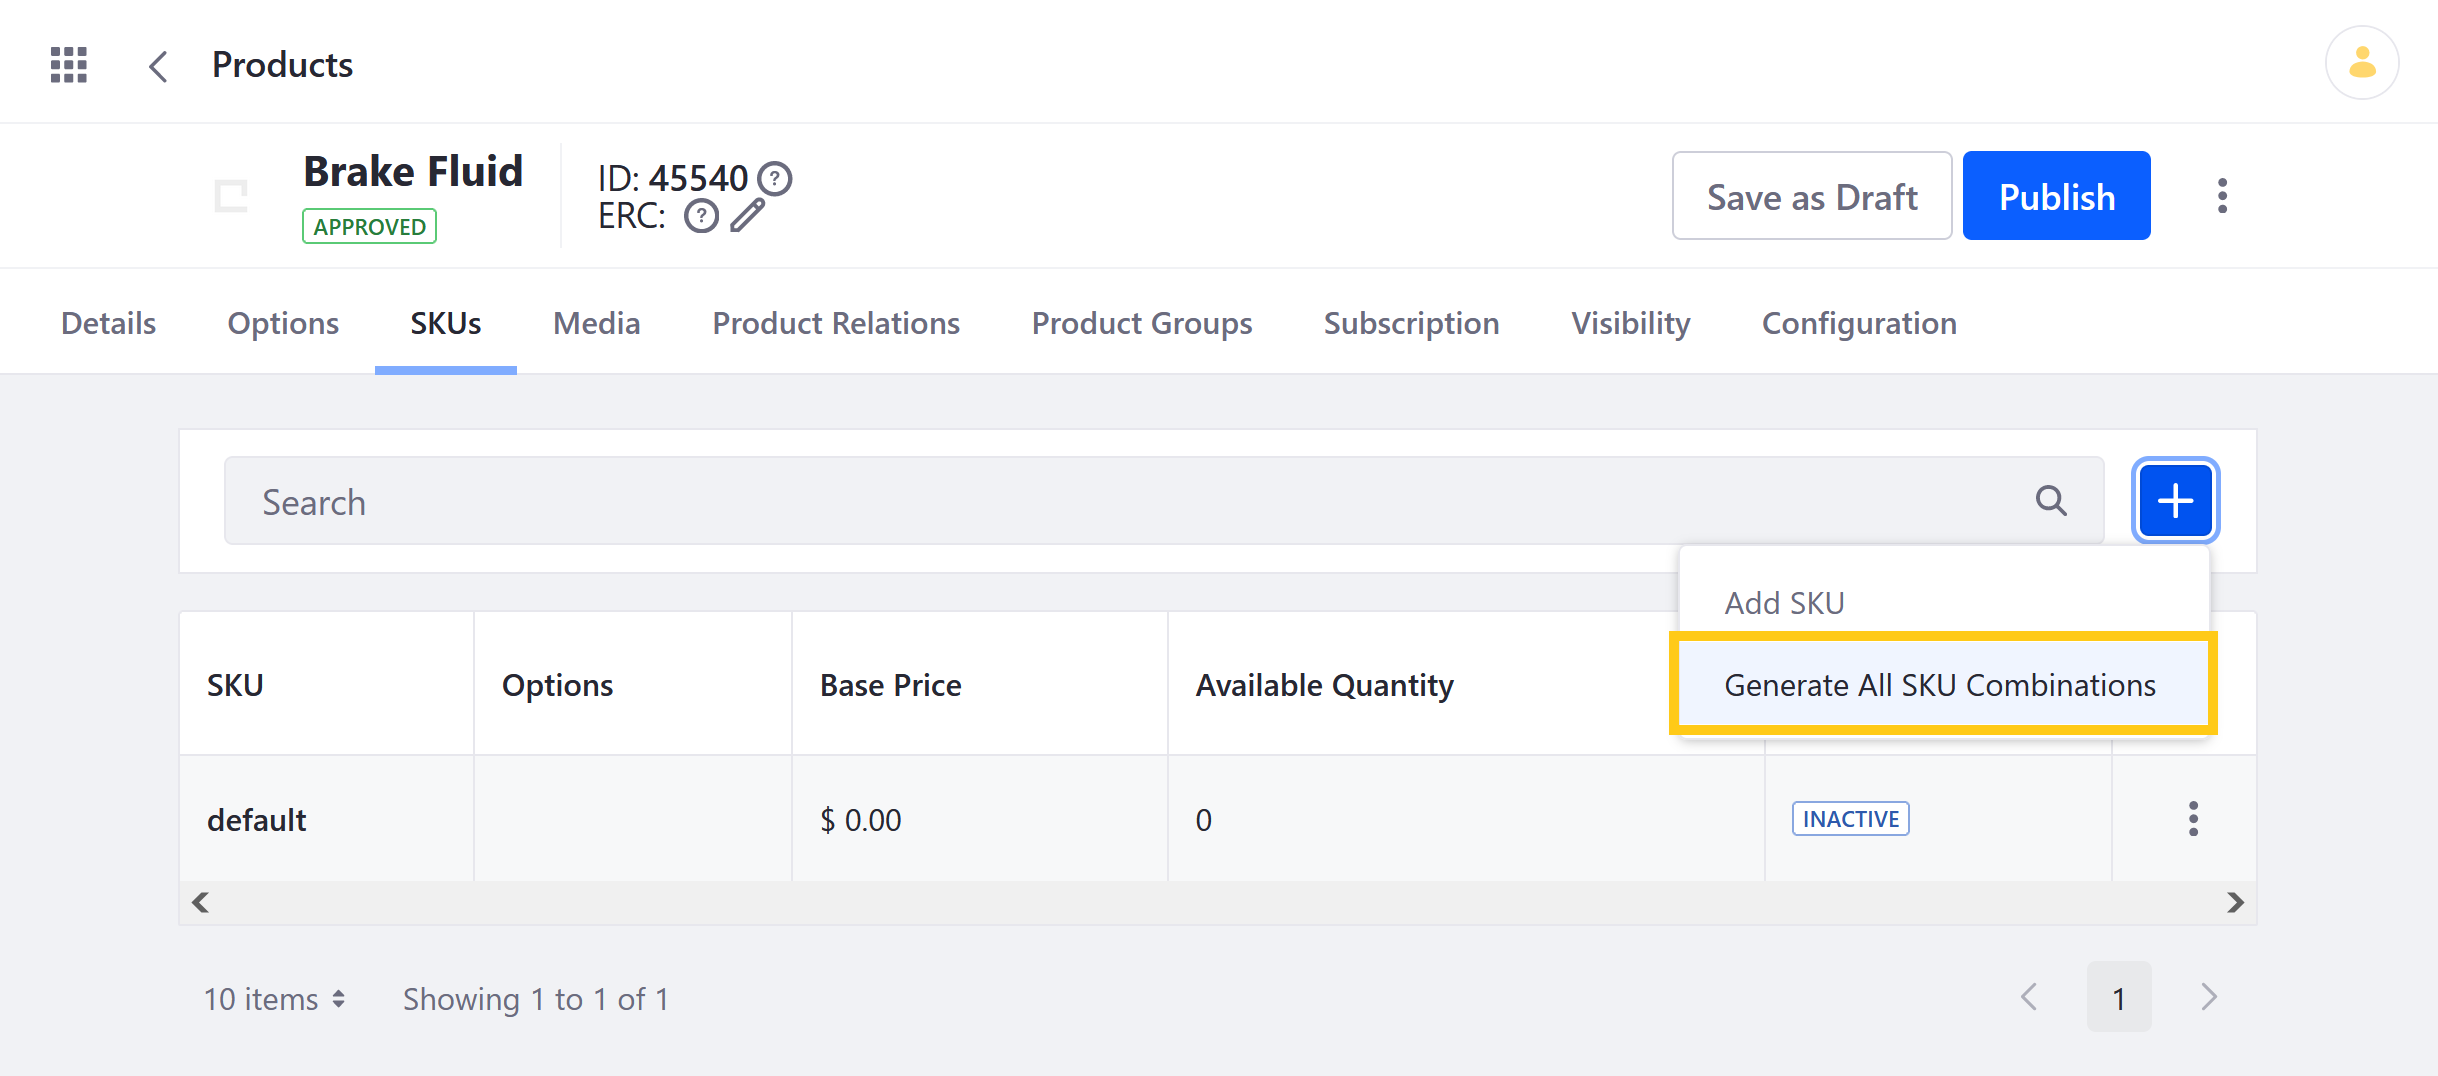 Select Generate All SKU Combinations.